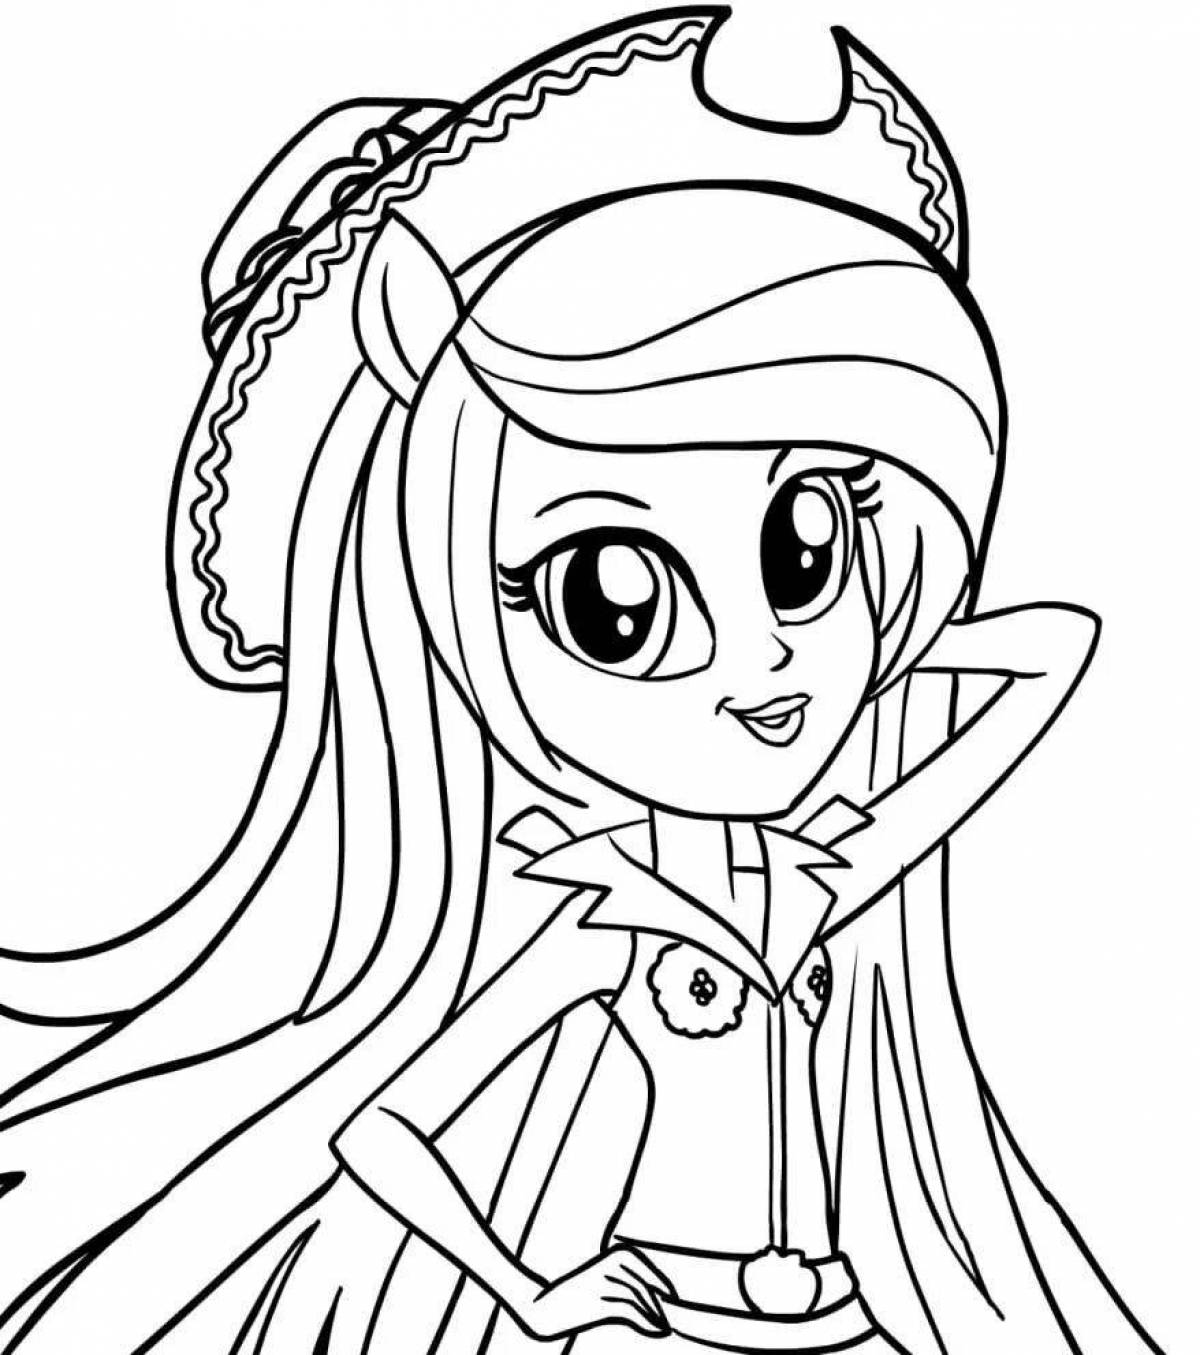 Coloring page freaky equestria girls